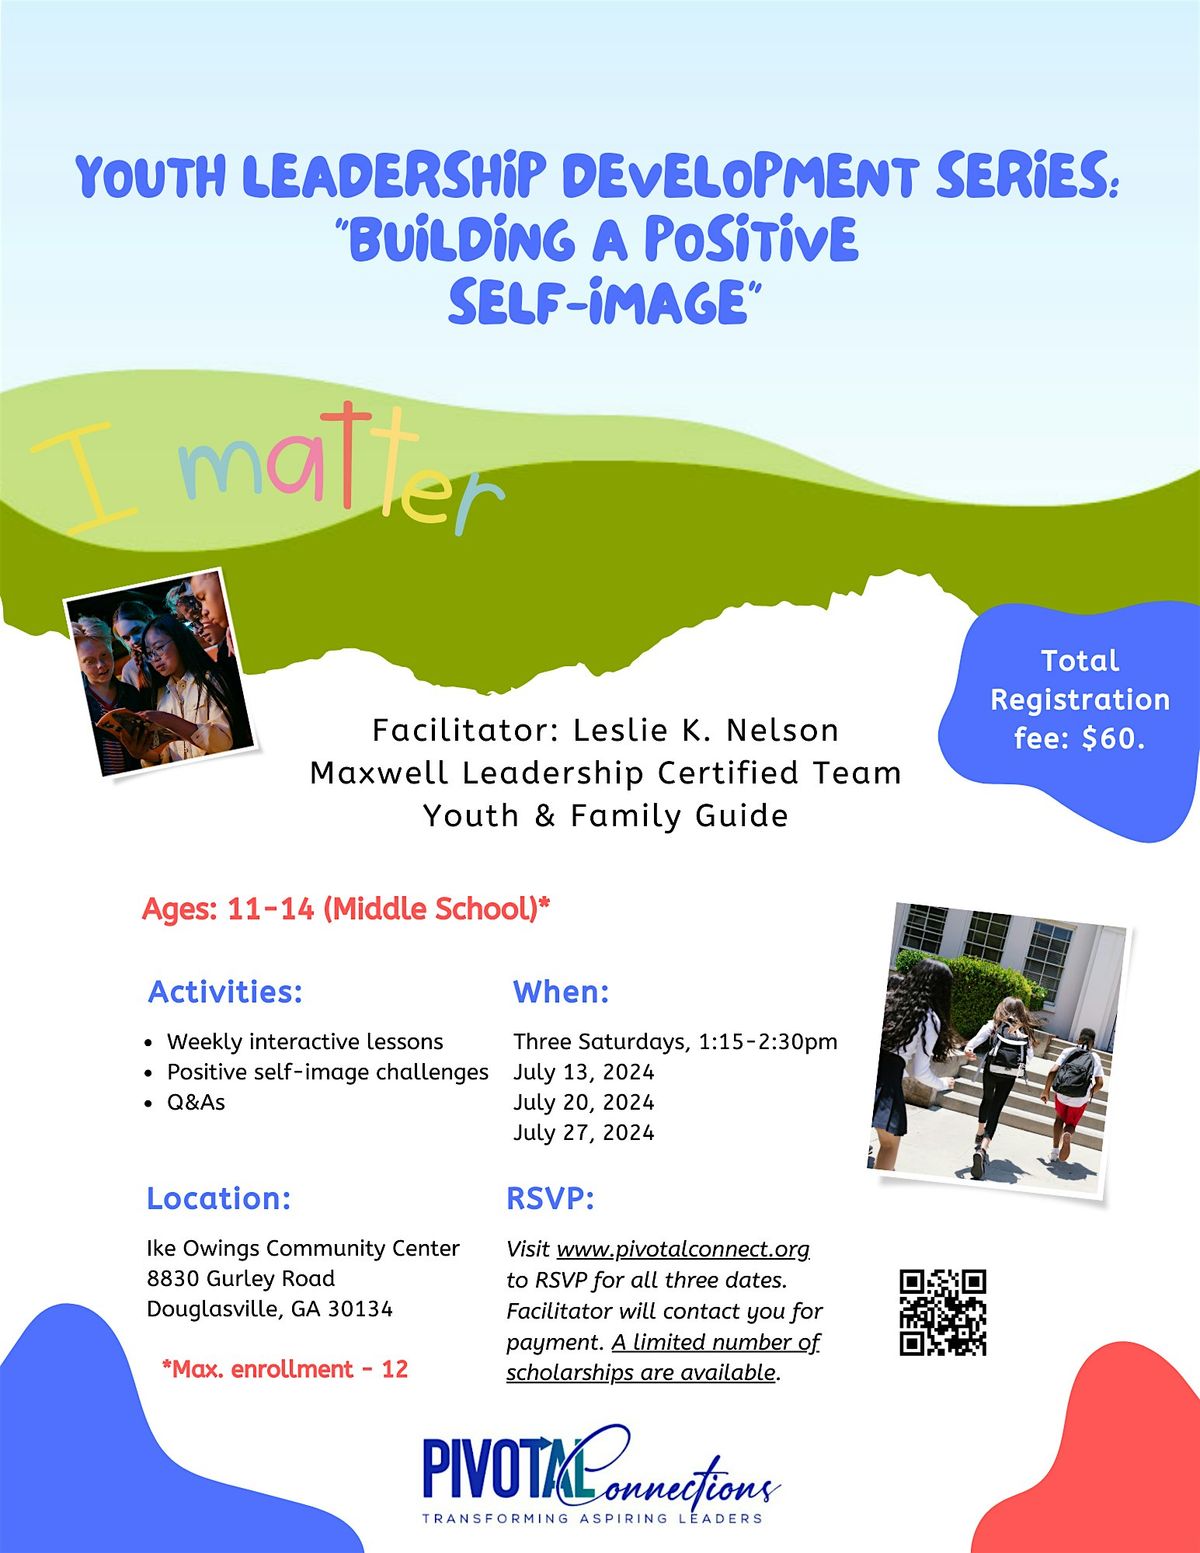 Youth Leadership Development Series: Building a Positive Self-Image